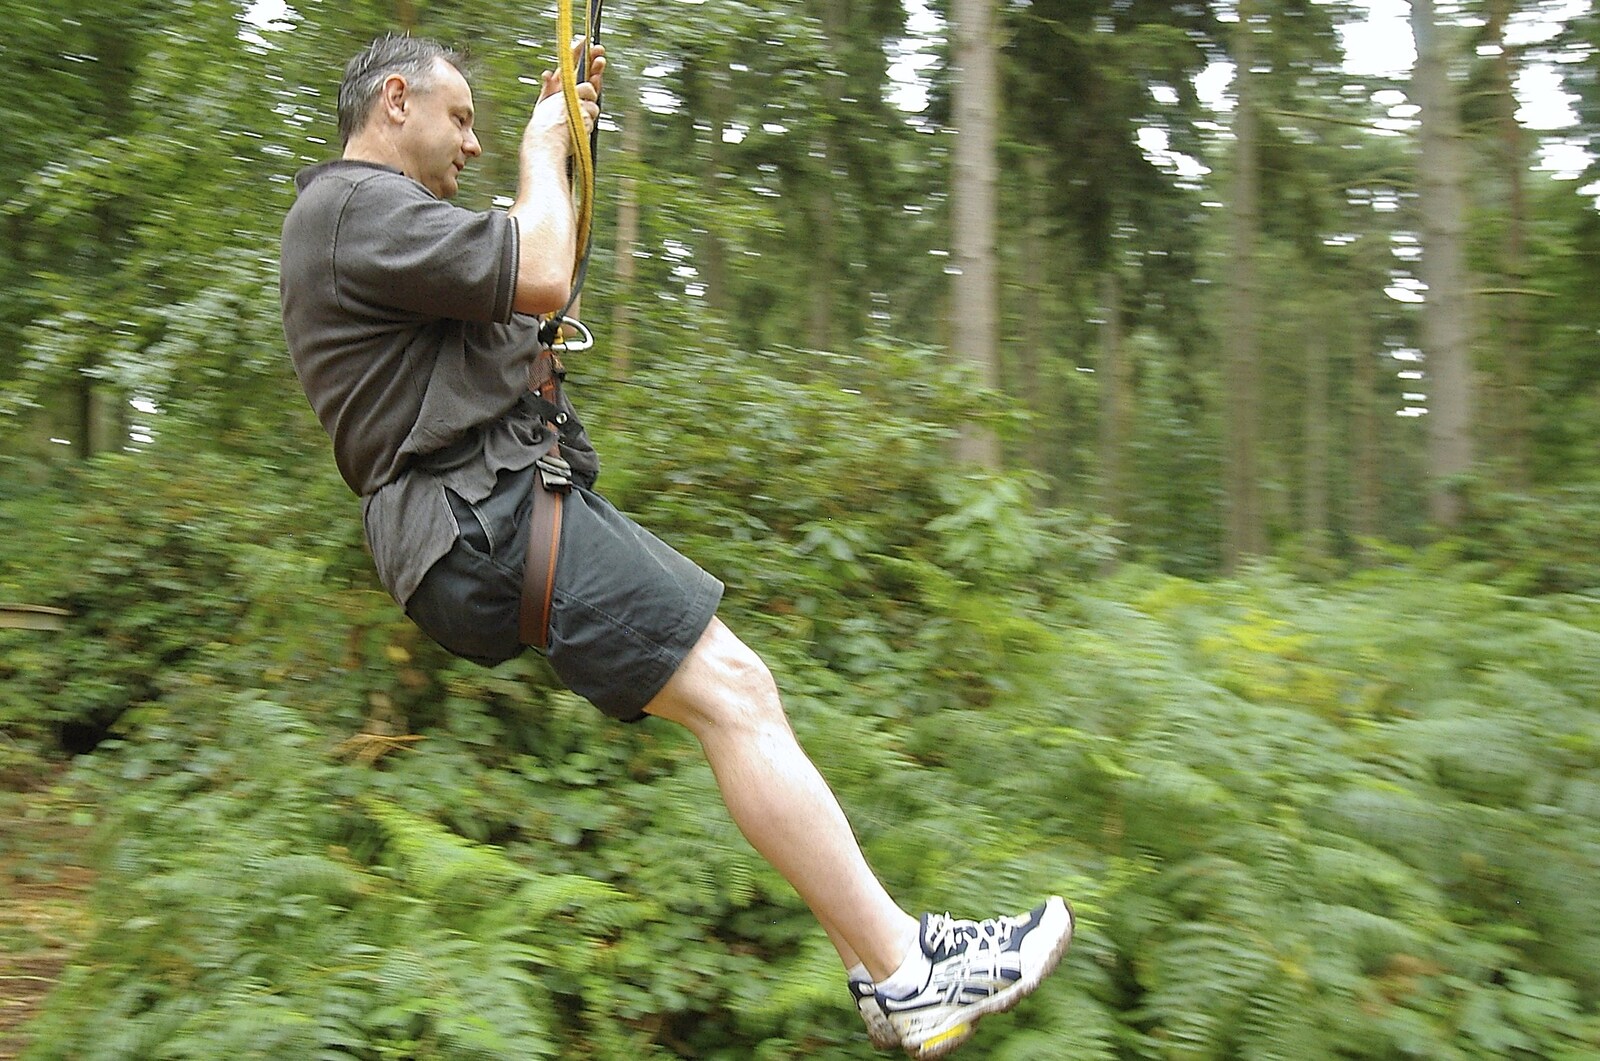 Dave slides down from Qualcomm Cambridge "Go Ape", High Lodge, Thetford Forest - 27th July 2006